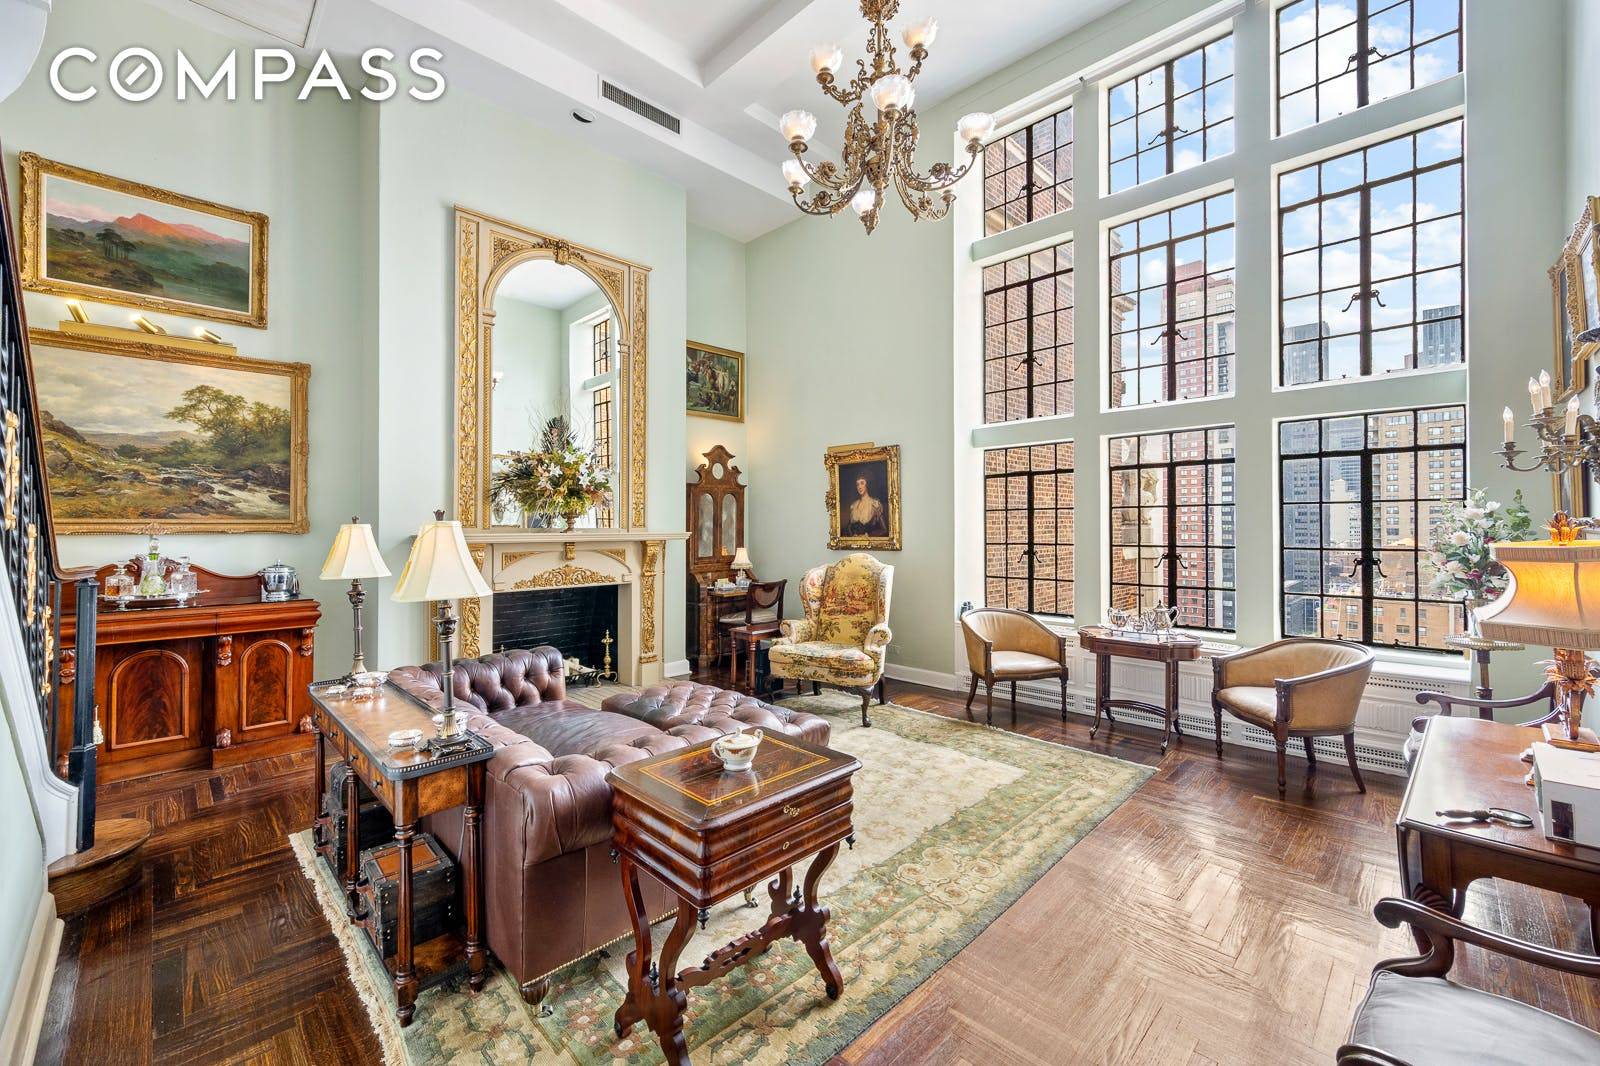 This one of a kind Tudor City penthouse features dramatic proportions with 18 foot ceilings clad with soaring 15 foot casement windows and coveted views of the Chrysler building.